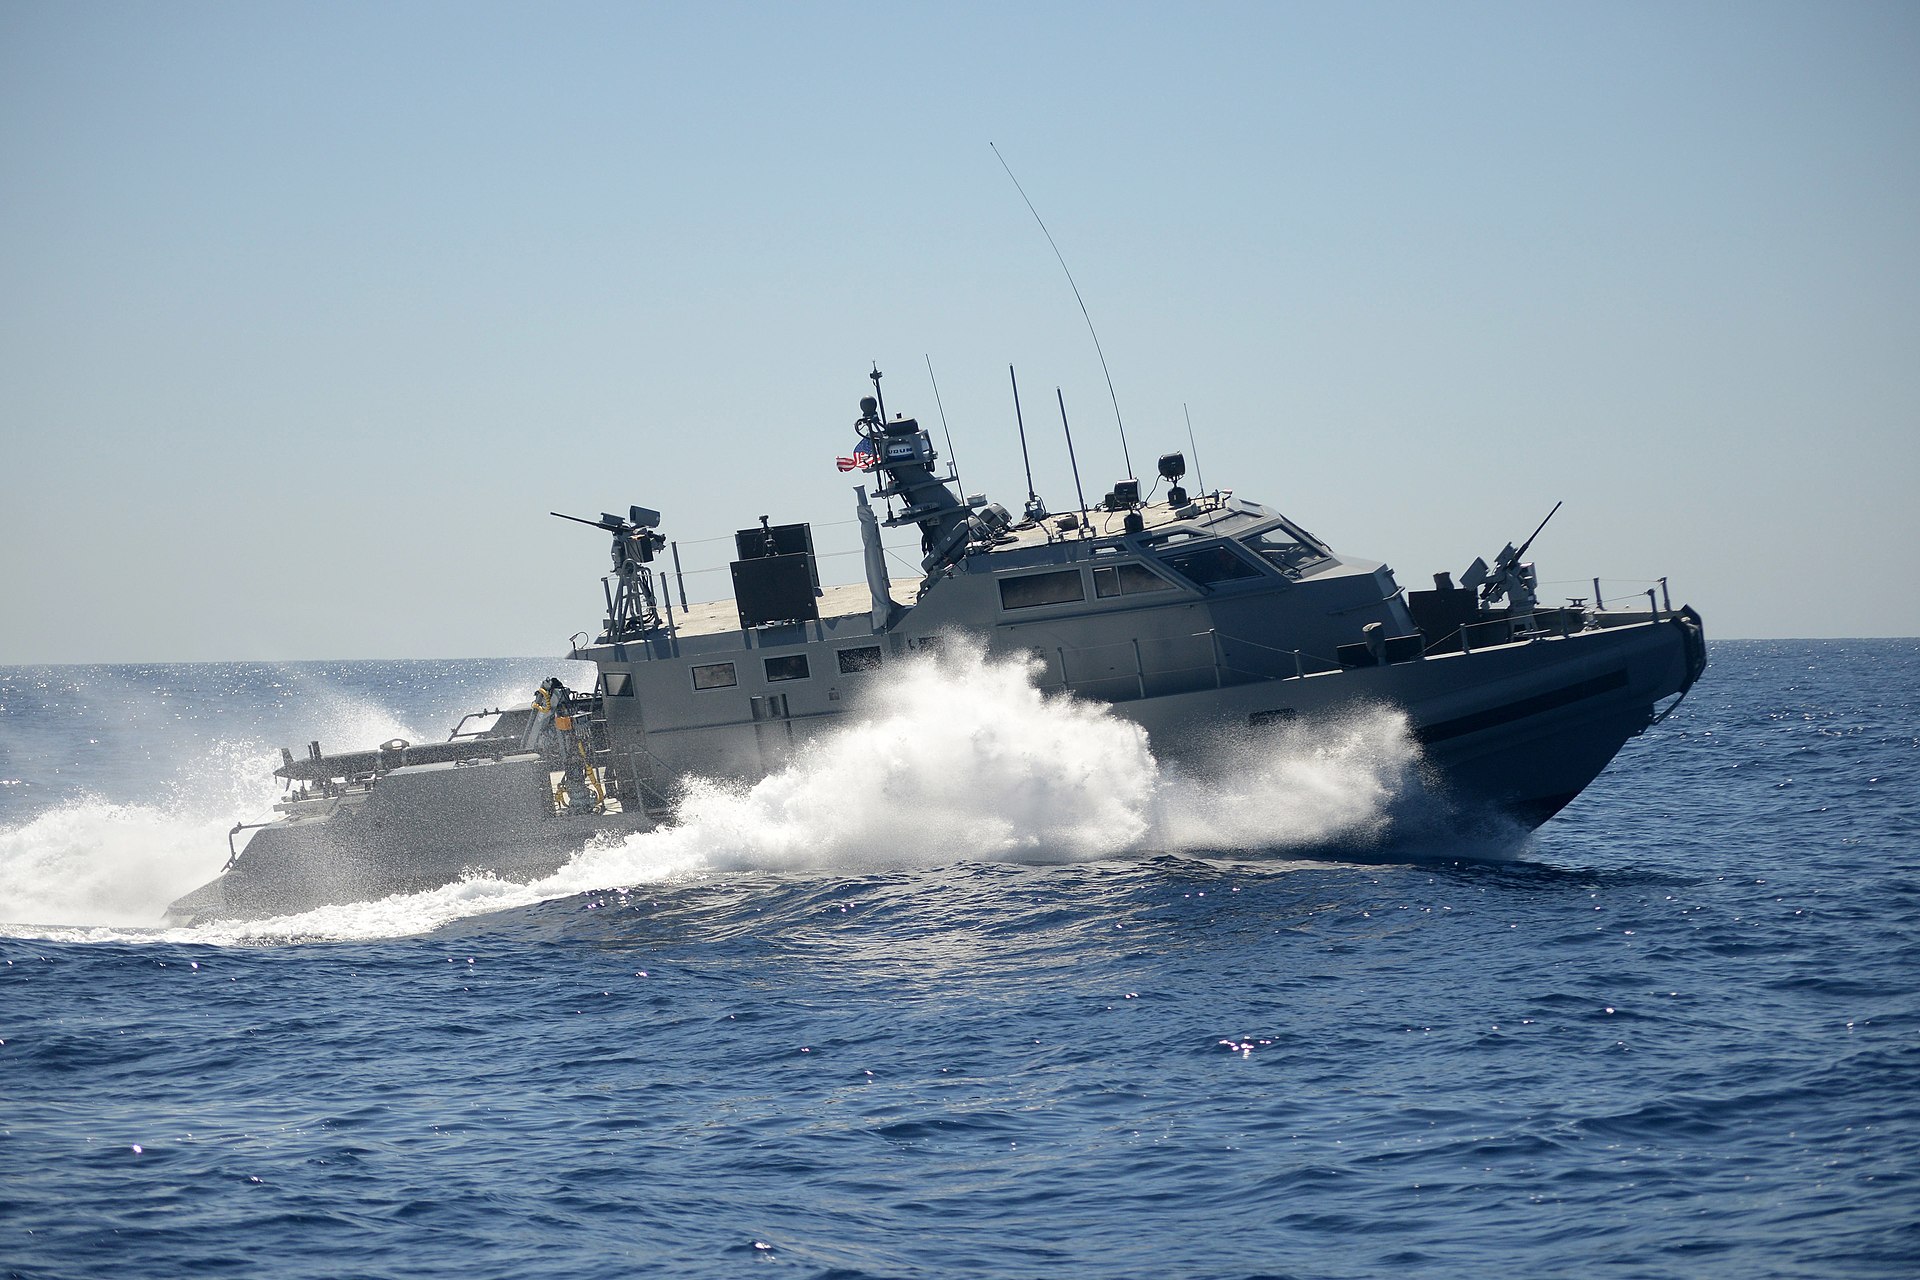 Ukraine to get at least 3 Mark VI boats in 2022